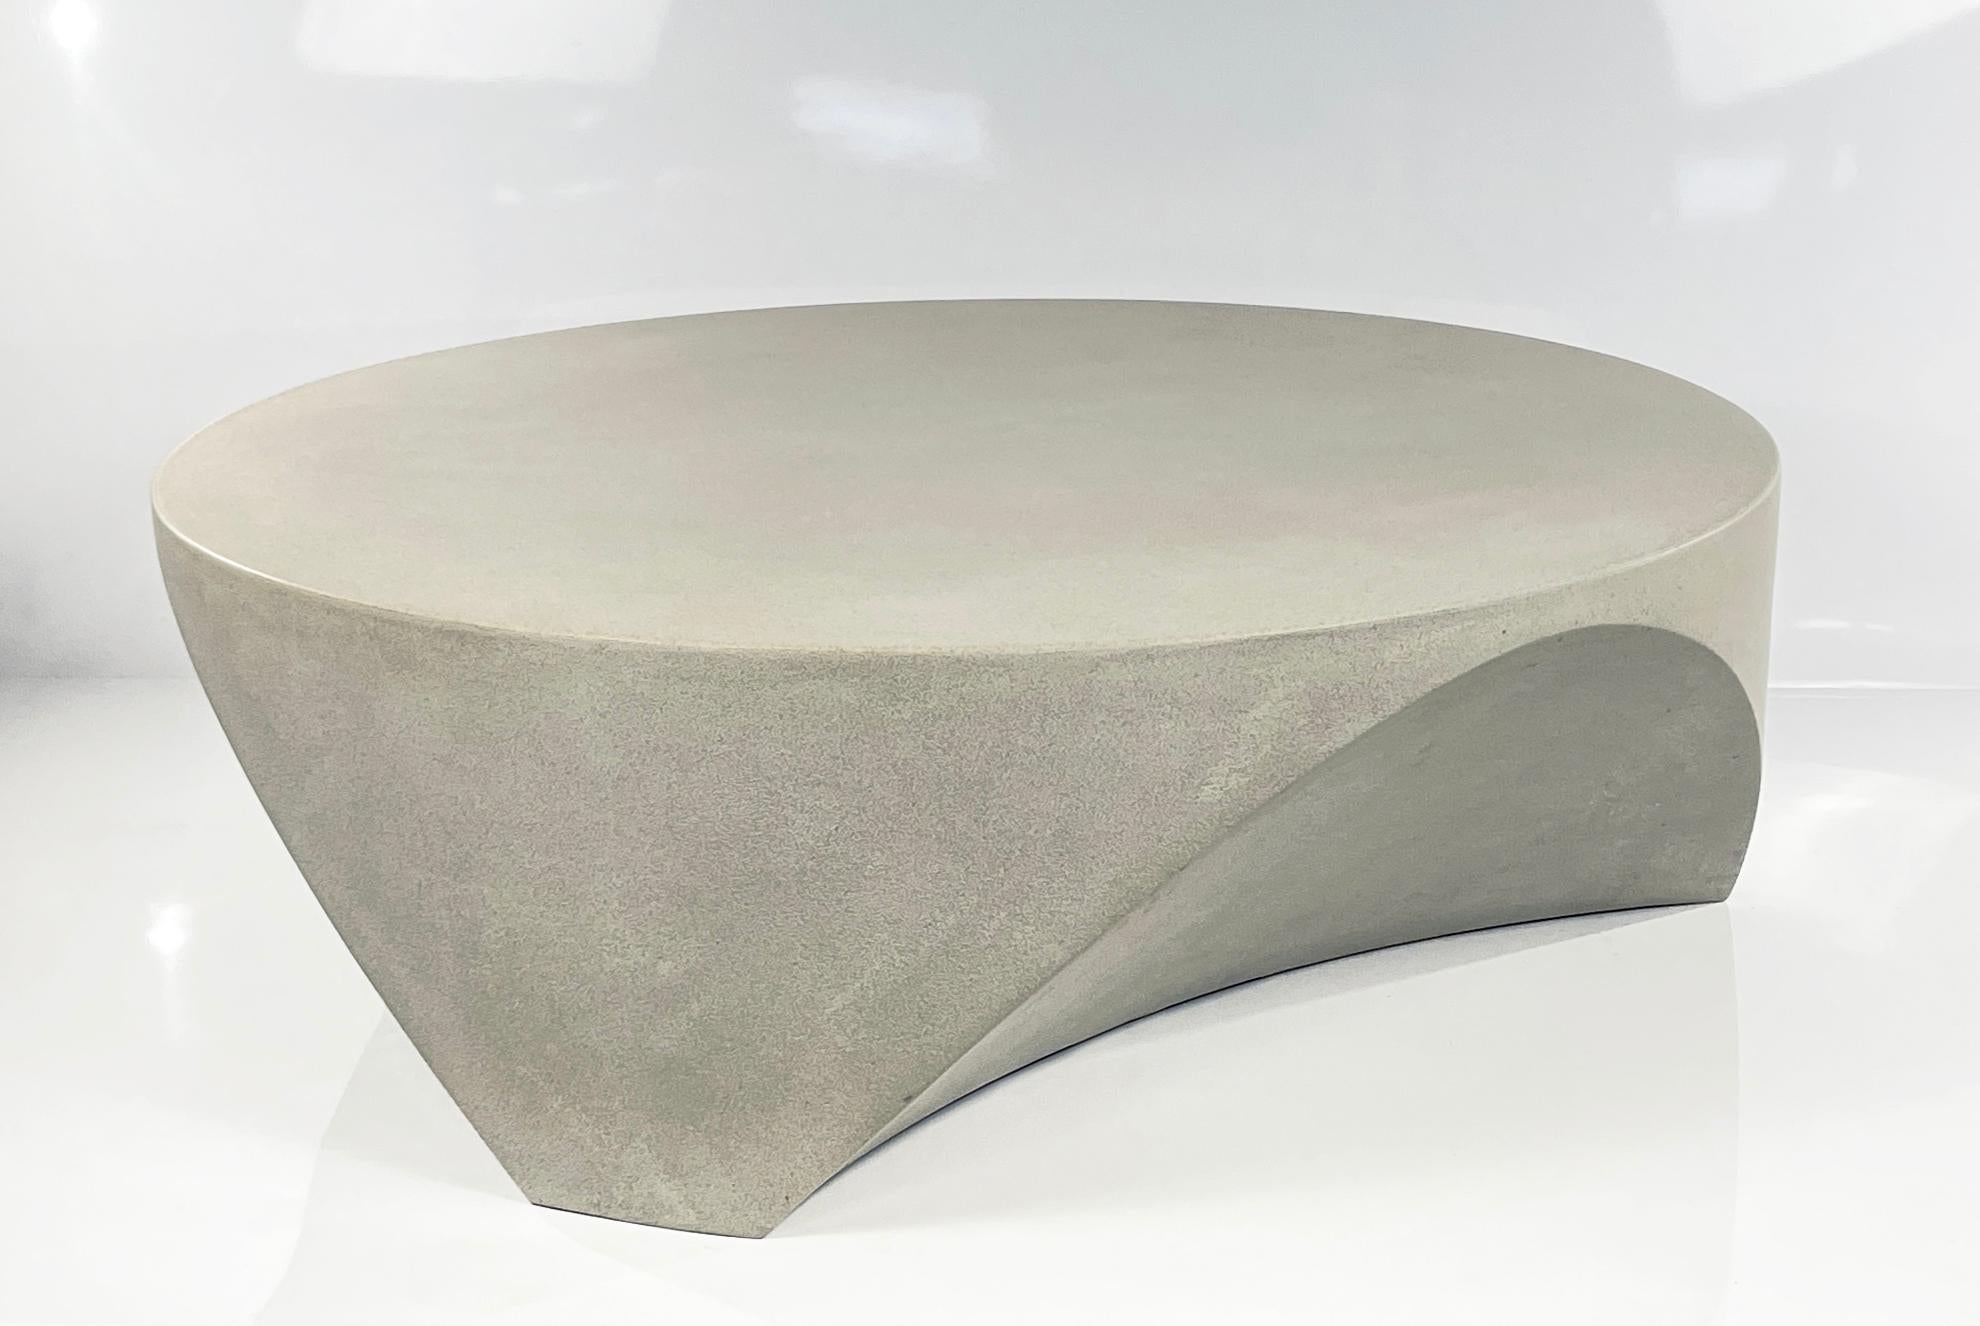 William Earle's barrens cocktail table in cast concrete/resin mix.
has the look of concrete with half of the weight.
also pictured, the barrens concrete side table / stool, as well as the barrens in italian walnut,
'charred' walnut and